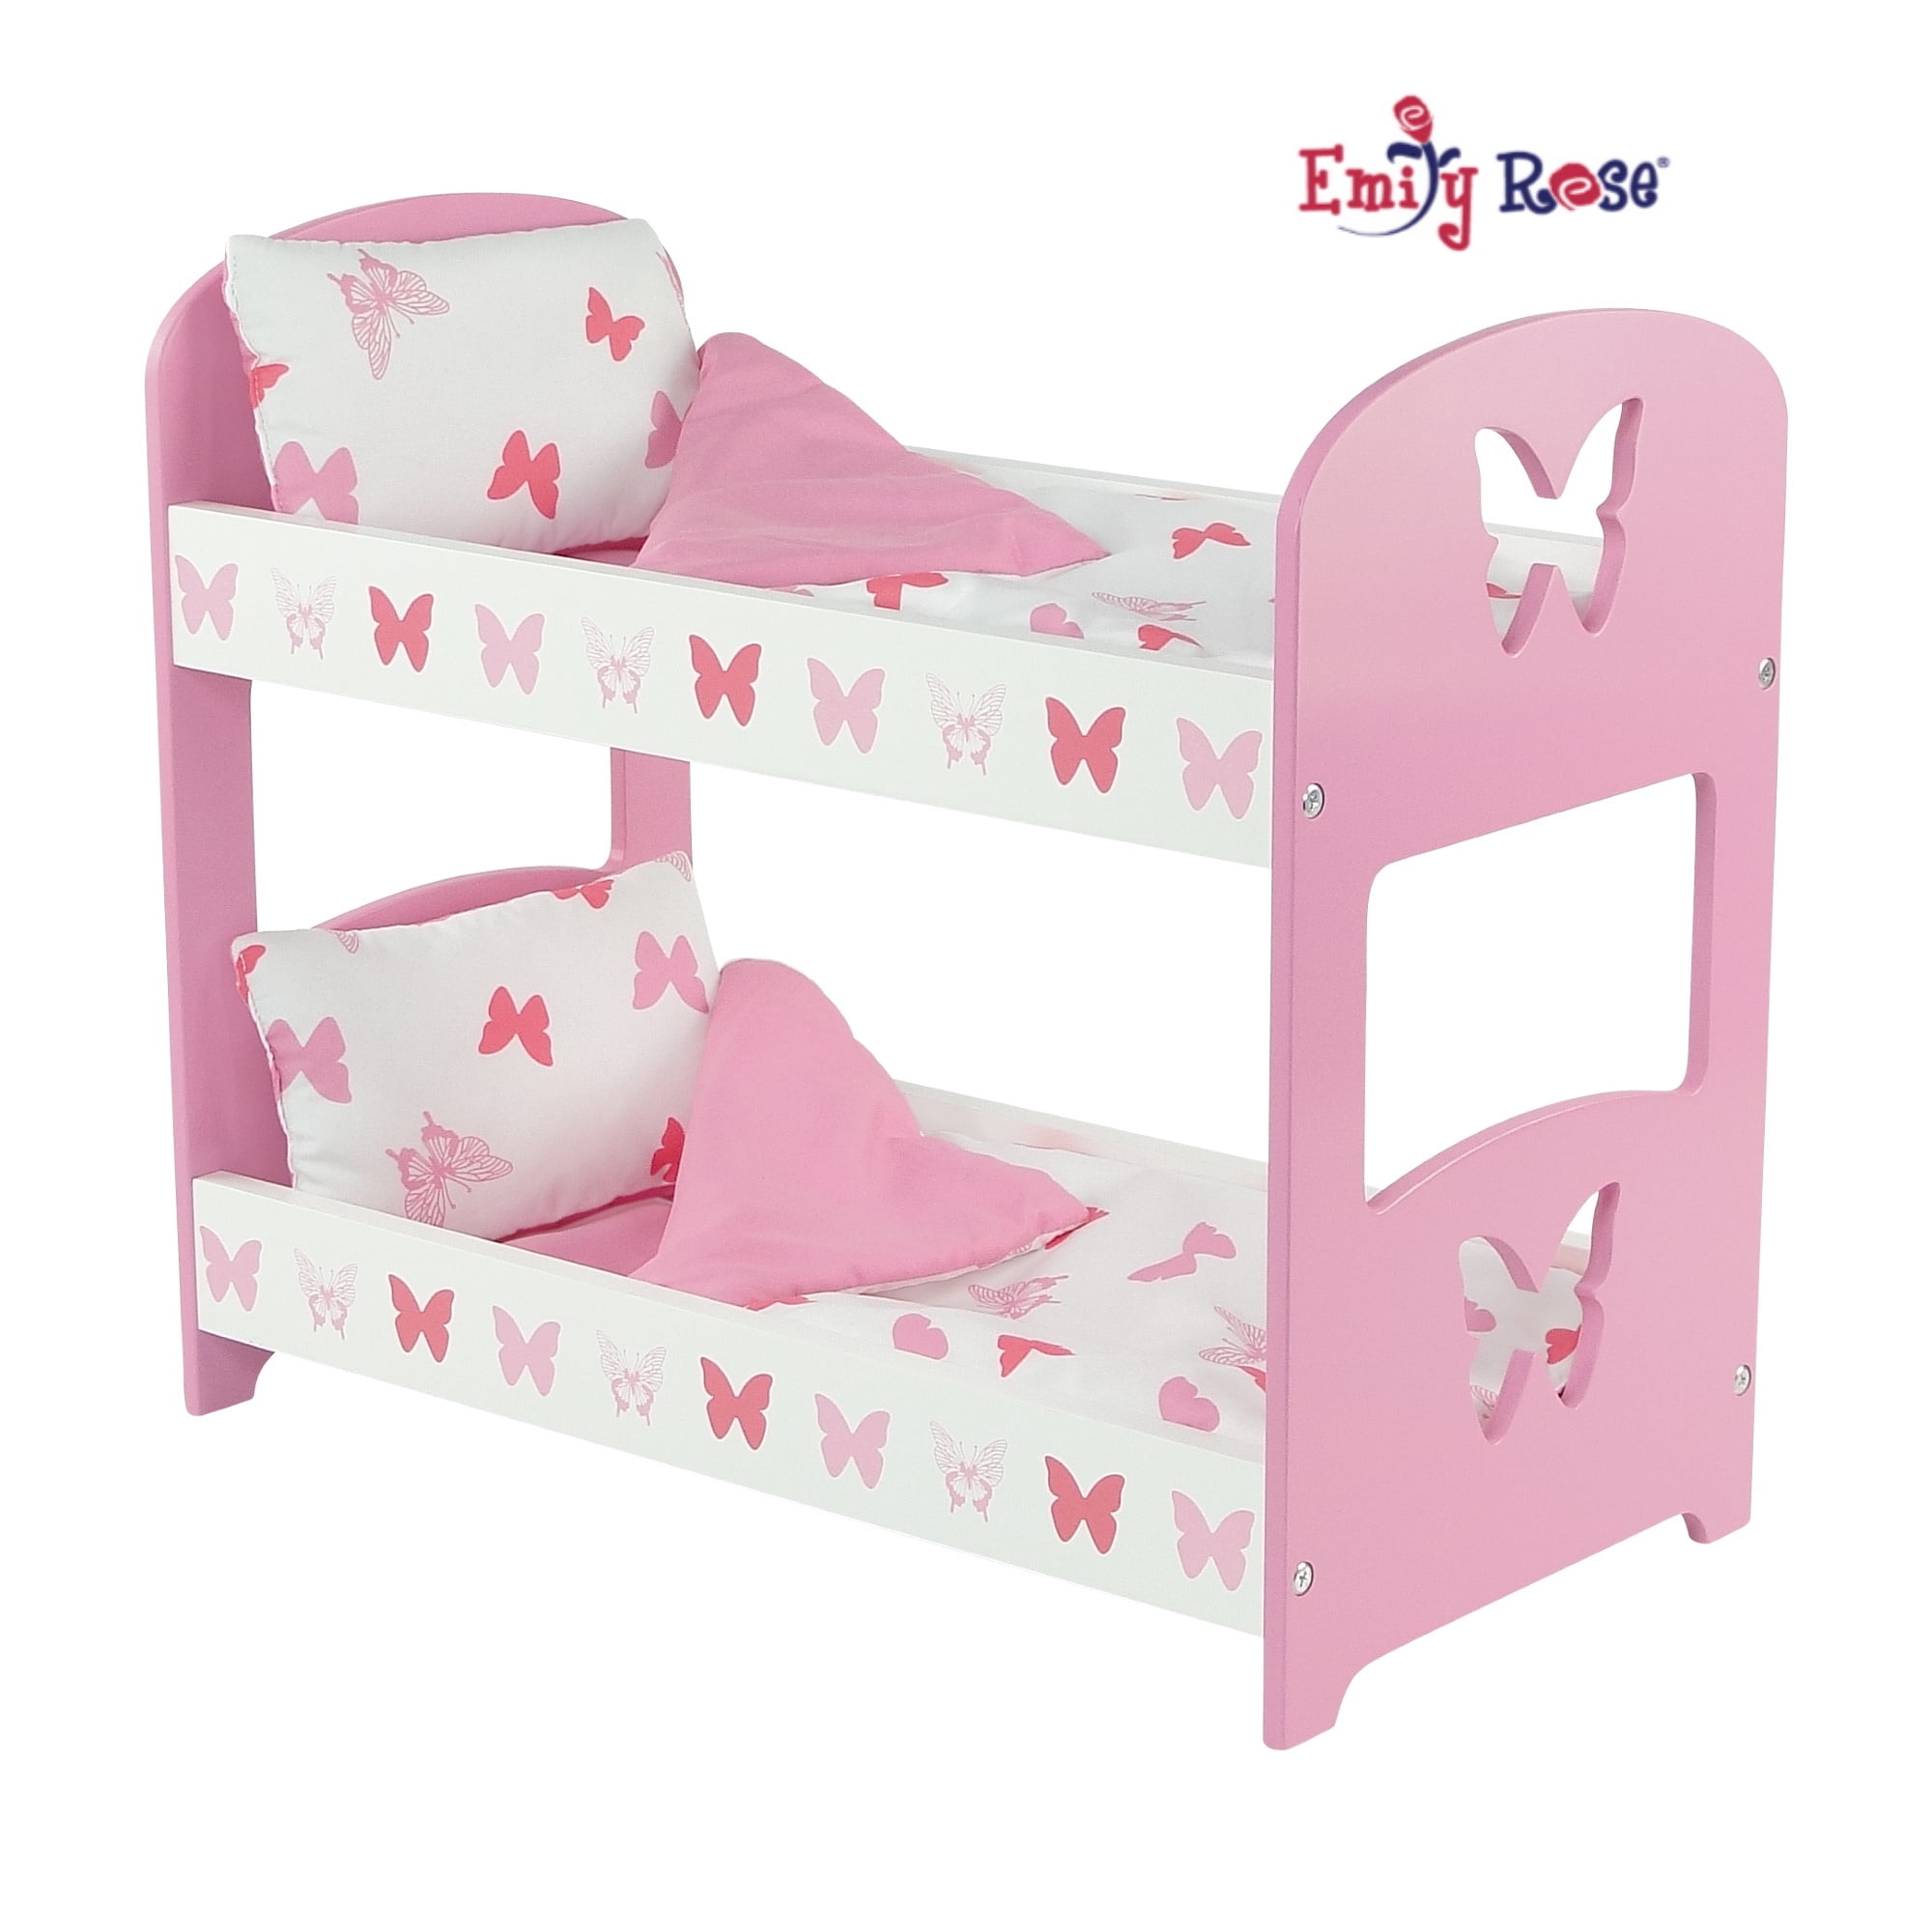 Emily Rose 18 Inch Doll Bed Com, Doll Bunk Beds American Girl